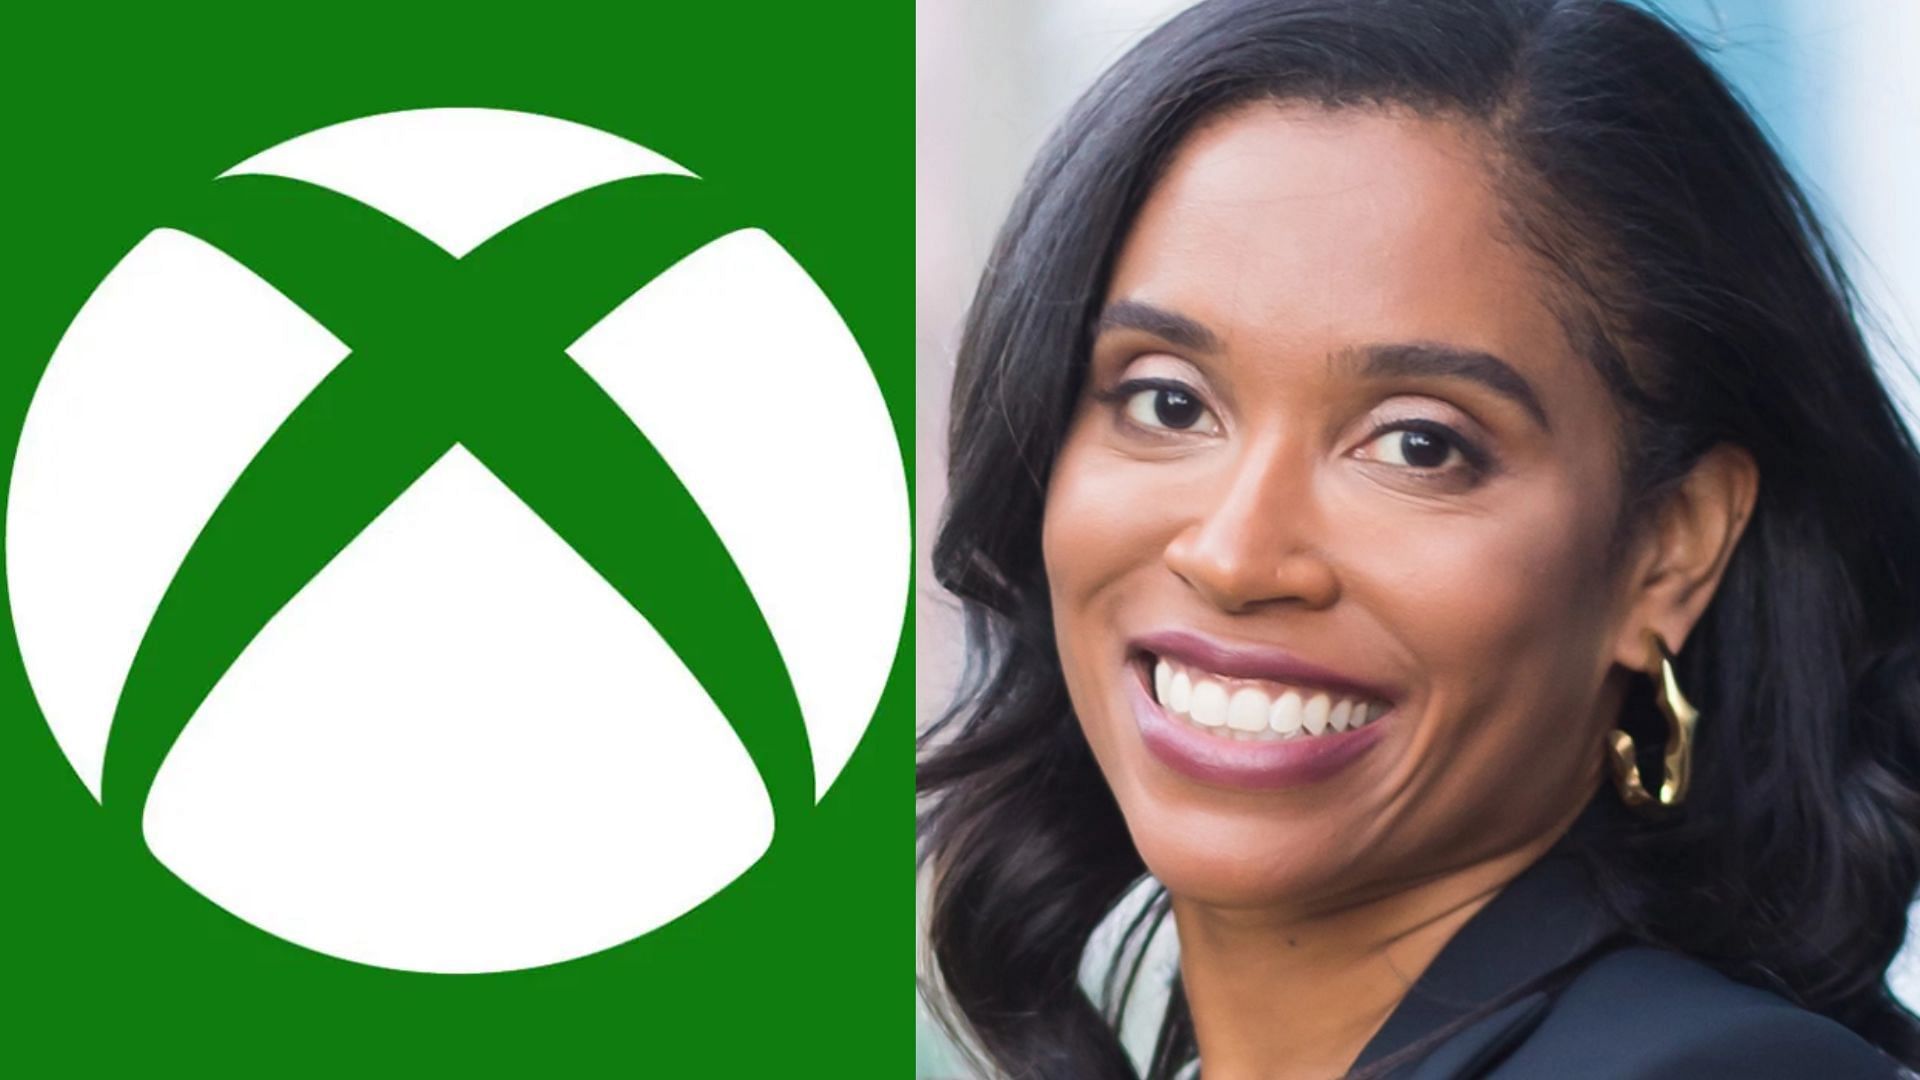 Sarah Bond, an Xbox executive, revealed key information at the federal court hearing today (Image via Microsoft)